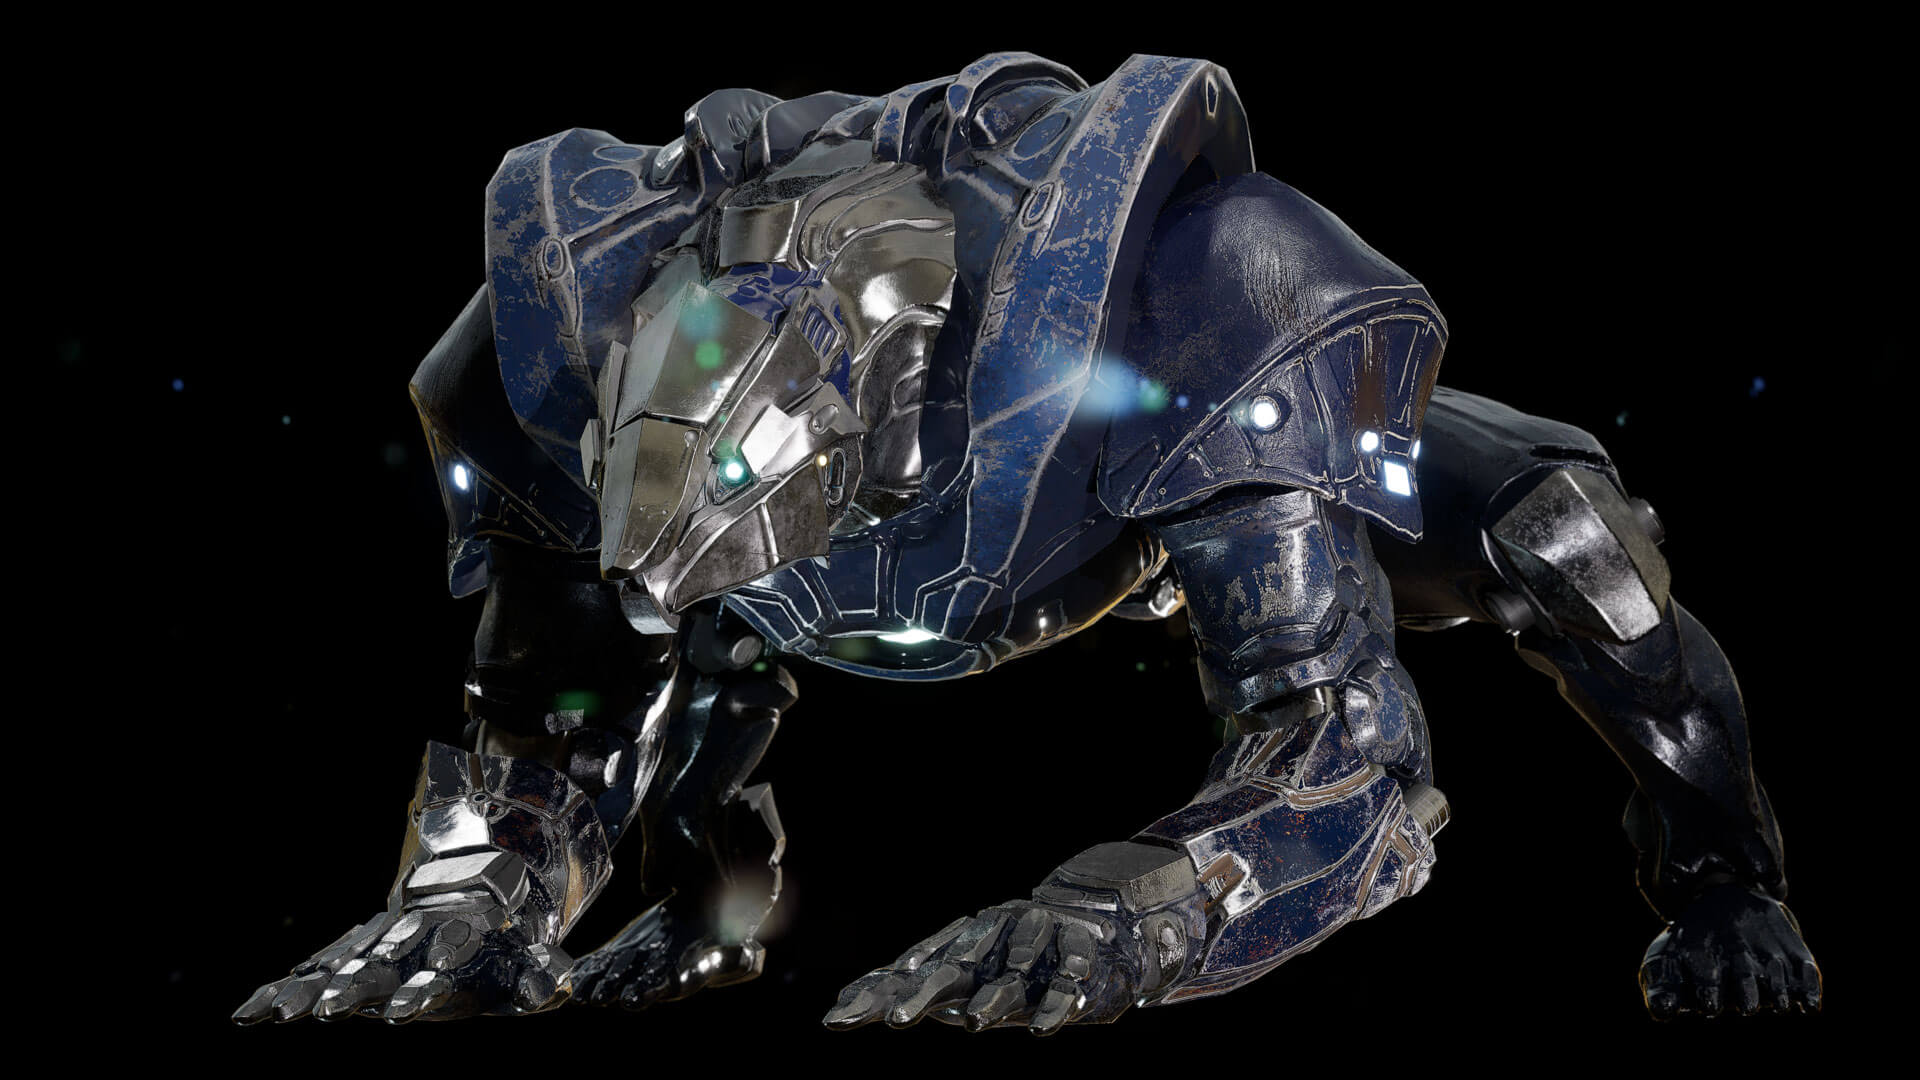 A buff robotic dog made of blue and silver steel.